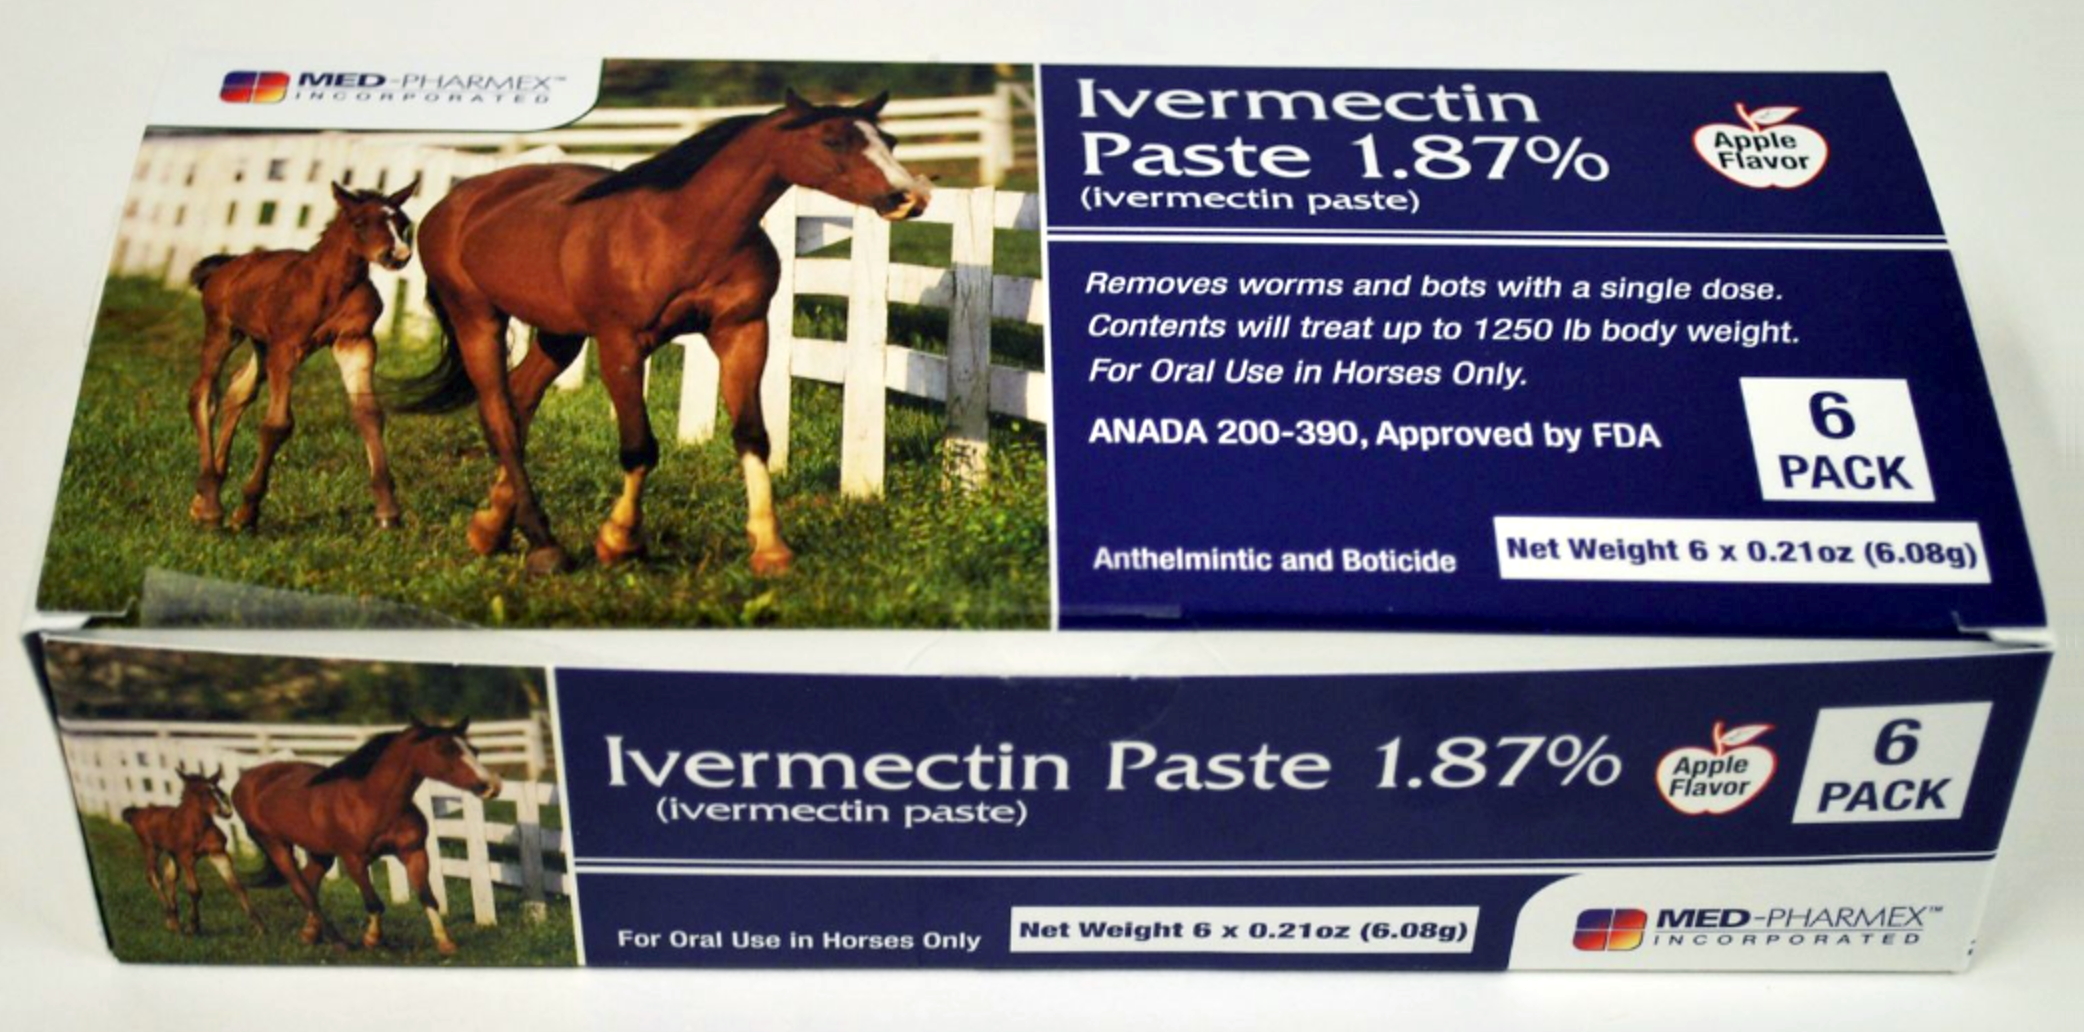 Package of ivermectin paste for deworming horses. One dose treats a horse with a body weight up to 1,250 pounds. In August 2021, poison centers across unvaccinated America saw huge increases in poisoning calls for ivermectin. Photo: Tractor Supply Company / Med-Pharmex